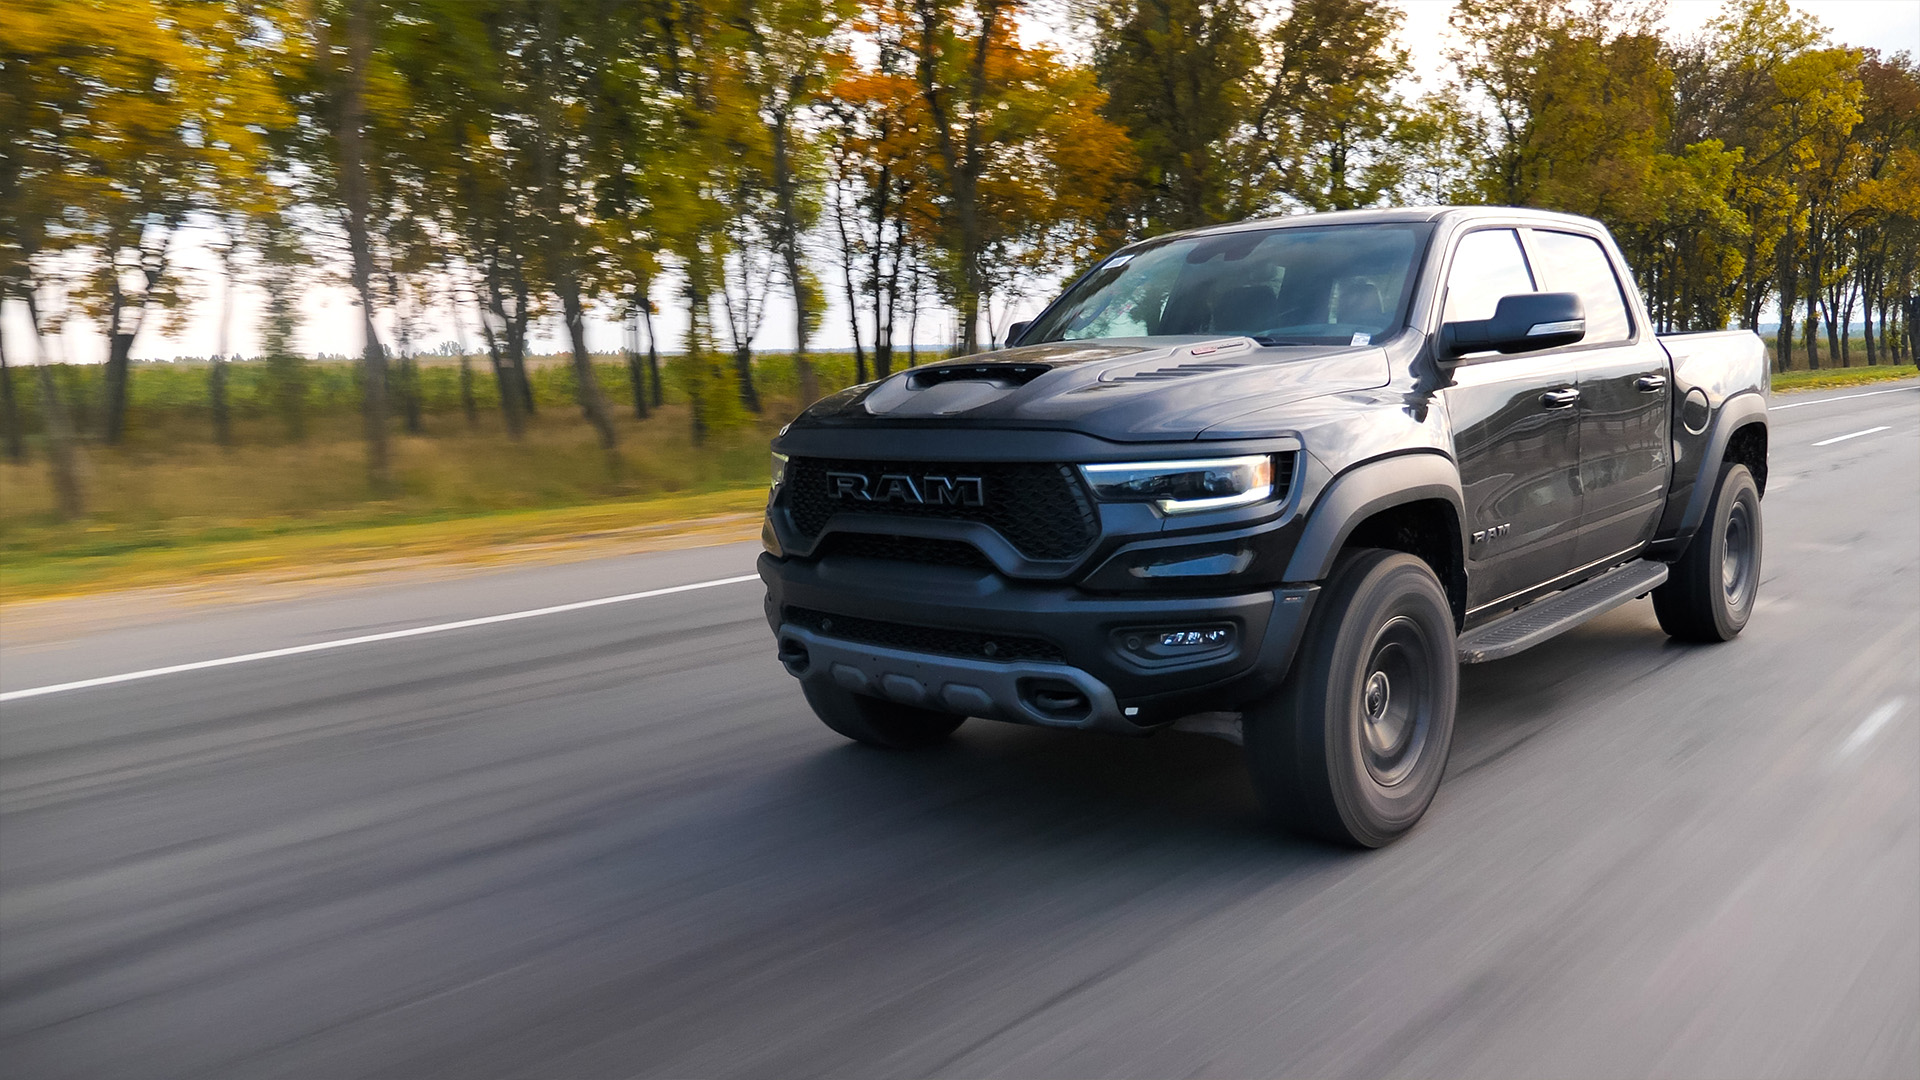 Dodge Ram TRX drives on a country road. Ram TRX is the most powerful series-production pick-up.